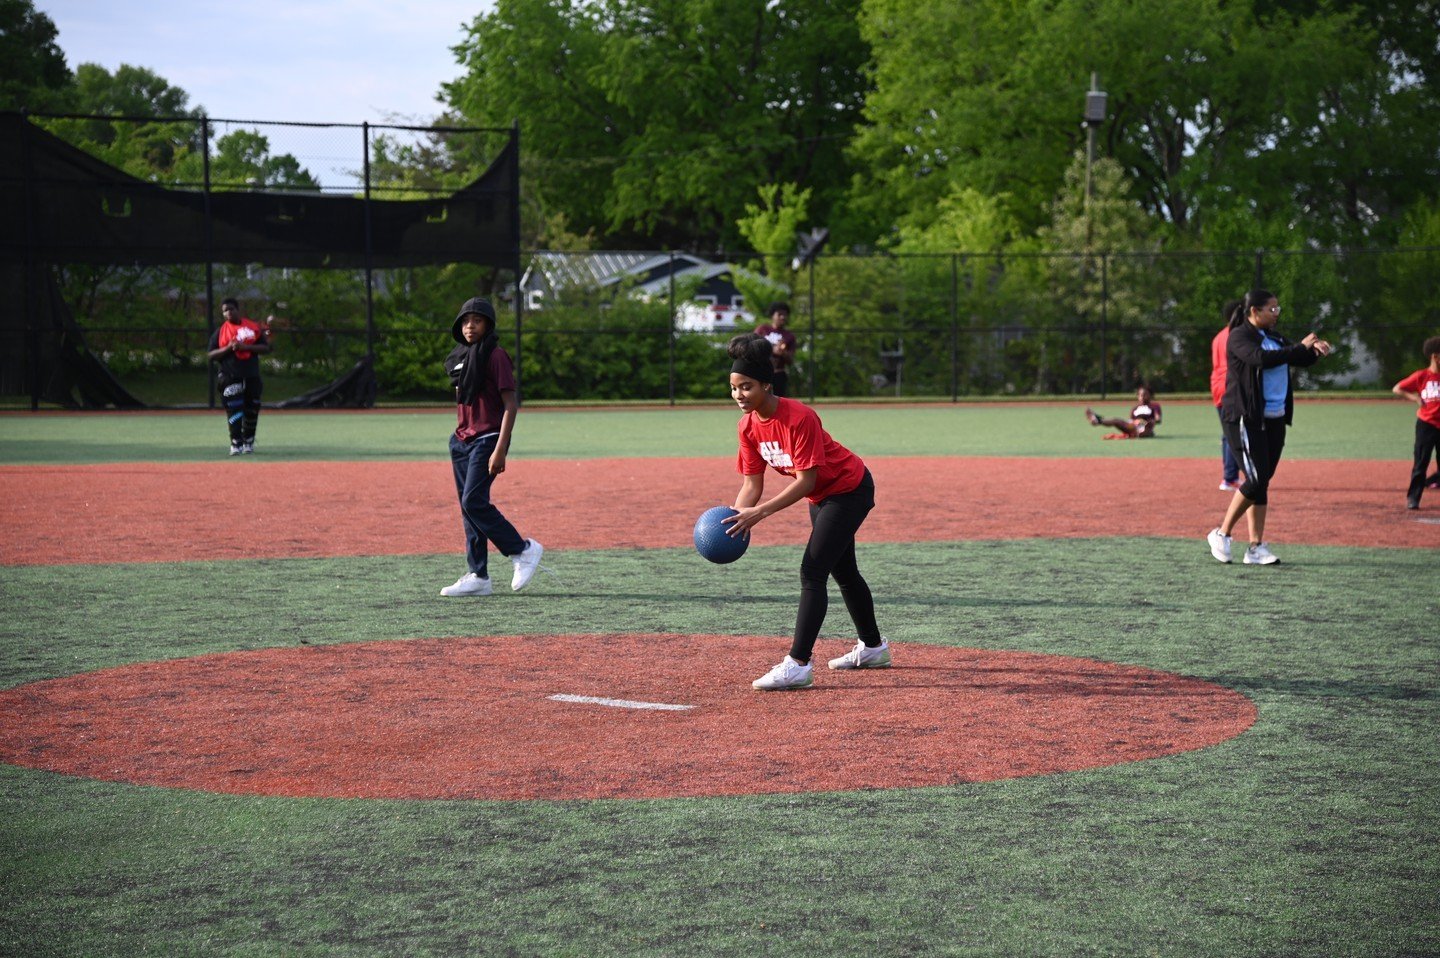 Our Southside staff and TCC Club members went head-to-head in an epic kickball game! 🌟 Whether you were dodging the ball like a pro or channeling your inner kickball superstar, everyone brought their A-game! ⚽💥 #TCCvsSouthside #youthactivities #gre